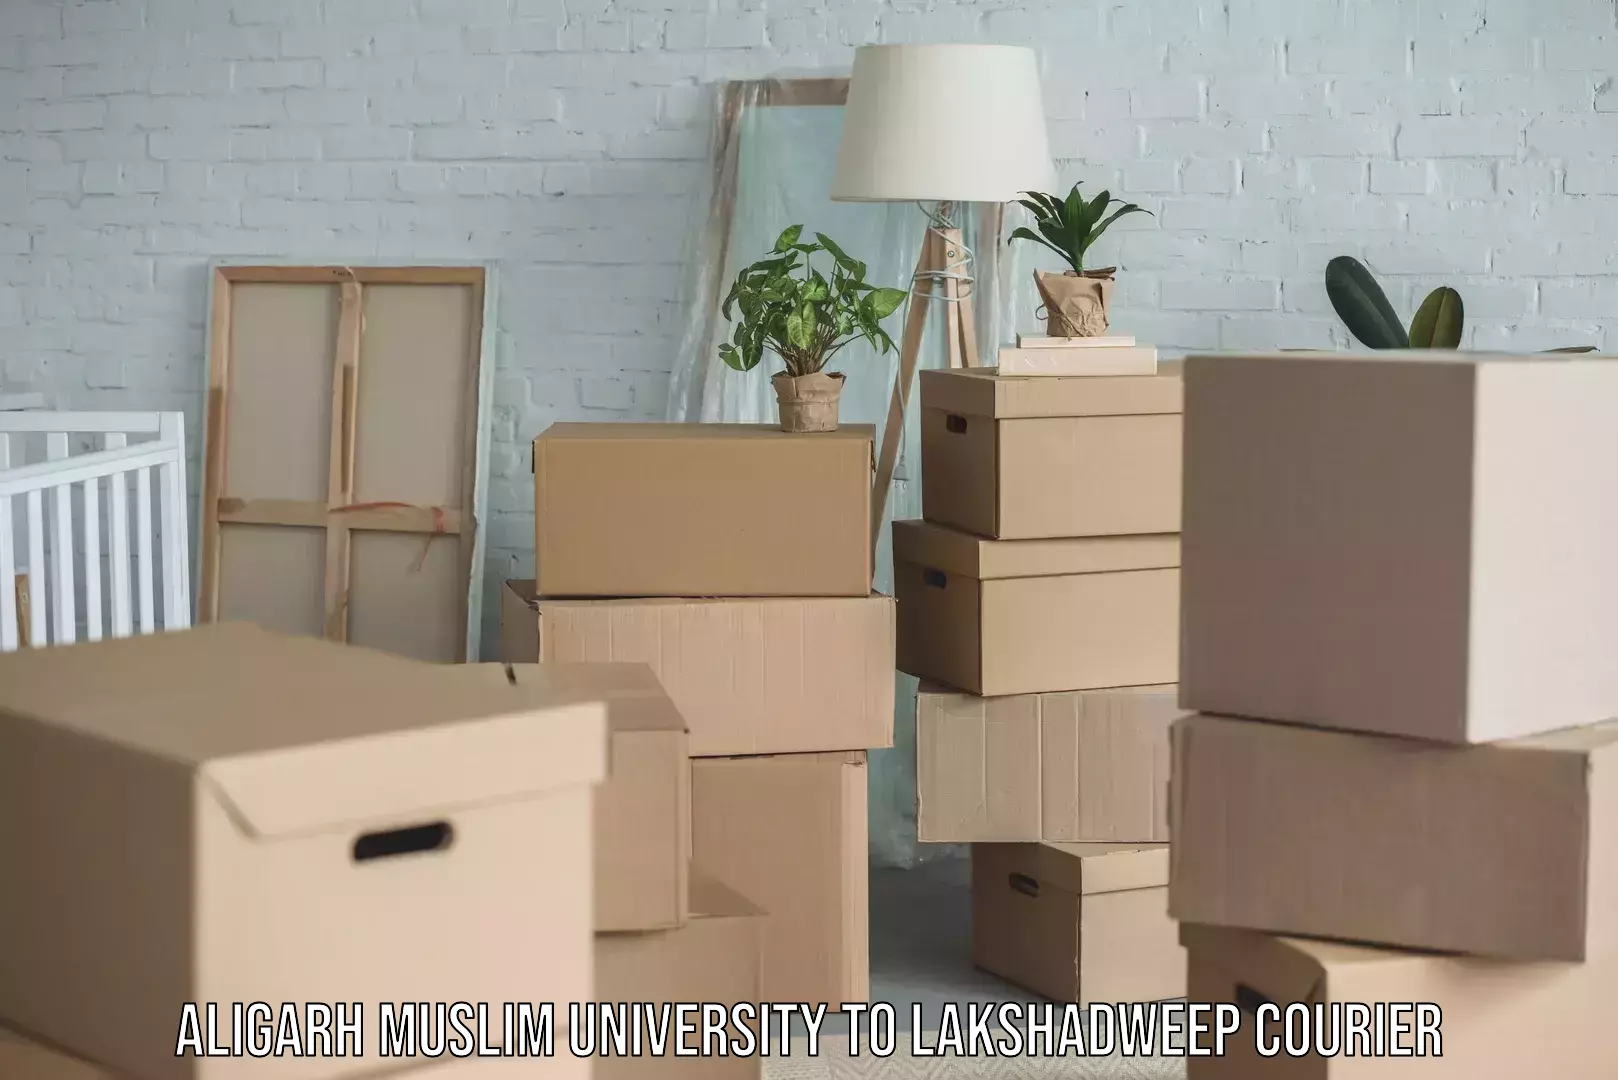 Fast shipping solutions Aligarh Muslim University to Lakshadweep